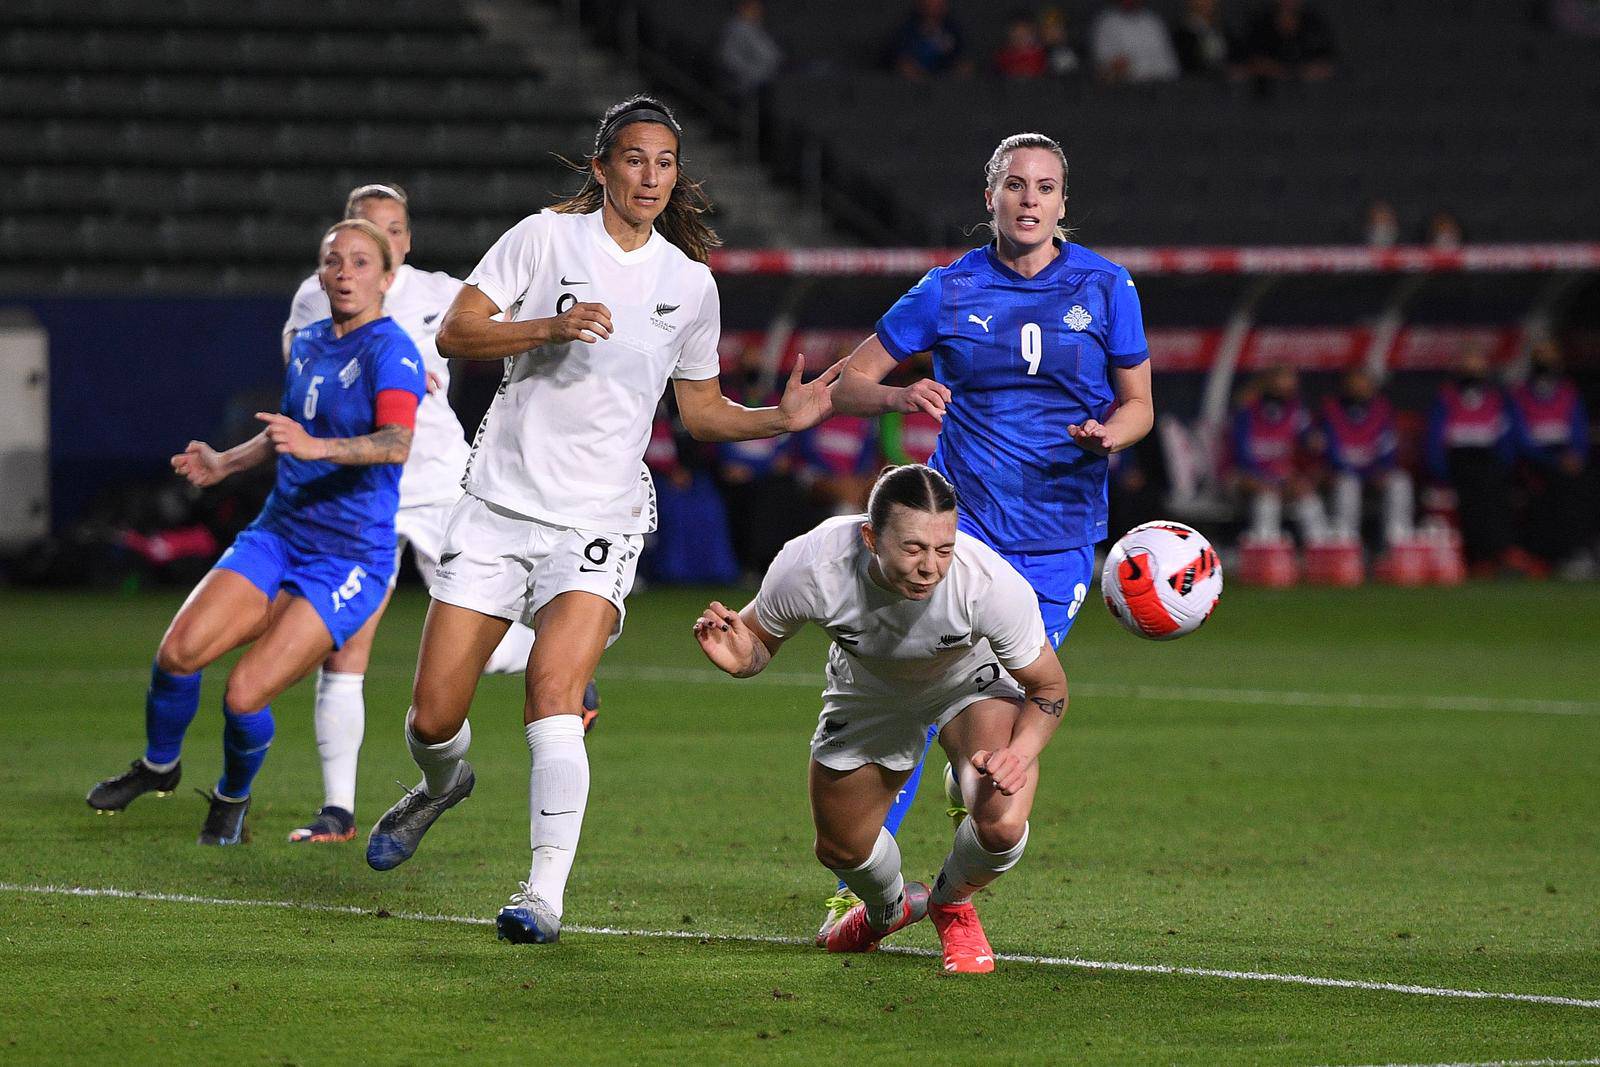 Soccer: 2022 SheBelieves Cup-New Zealand at Iceland